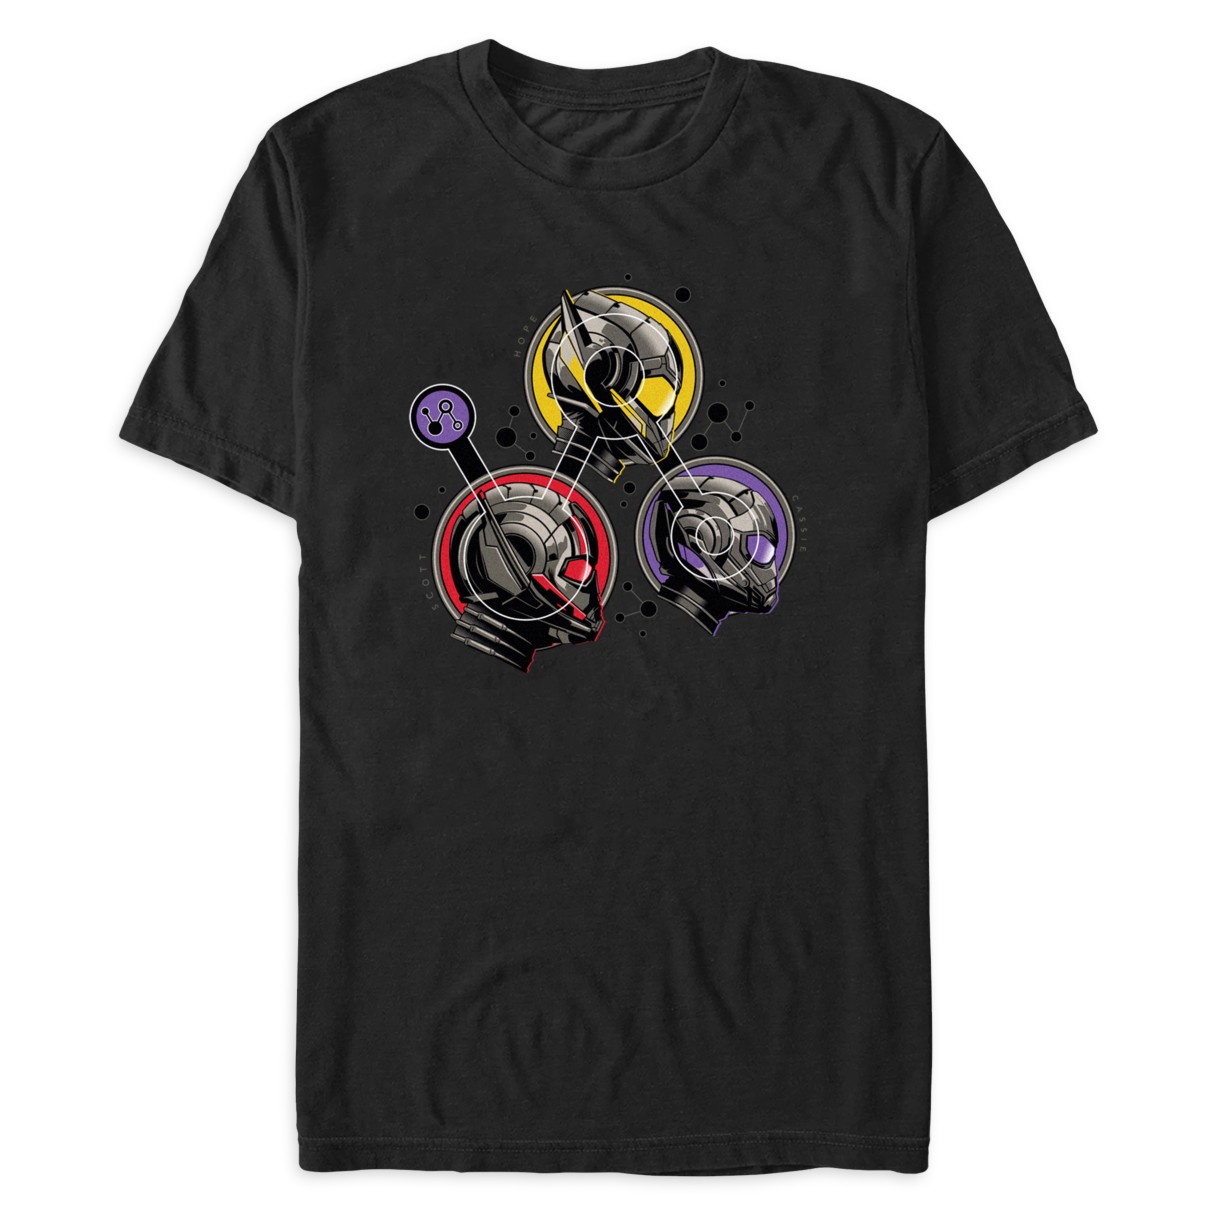 Ant-Man, the Wasp and Stature T-shirt for Adults – Ant-Man and the Wasp: Quantumania